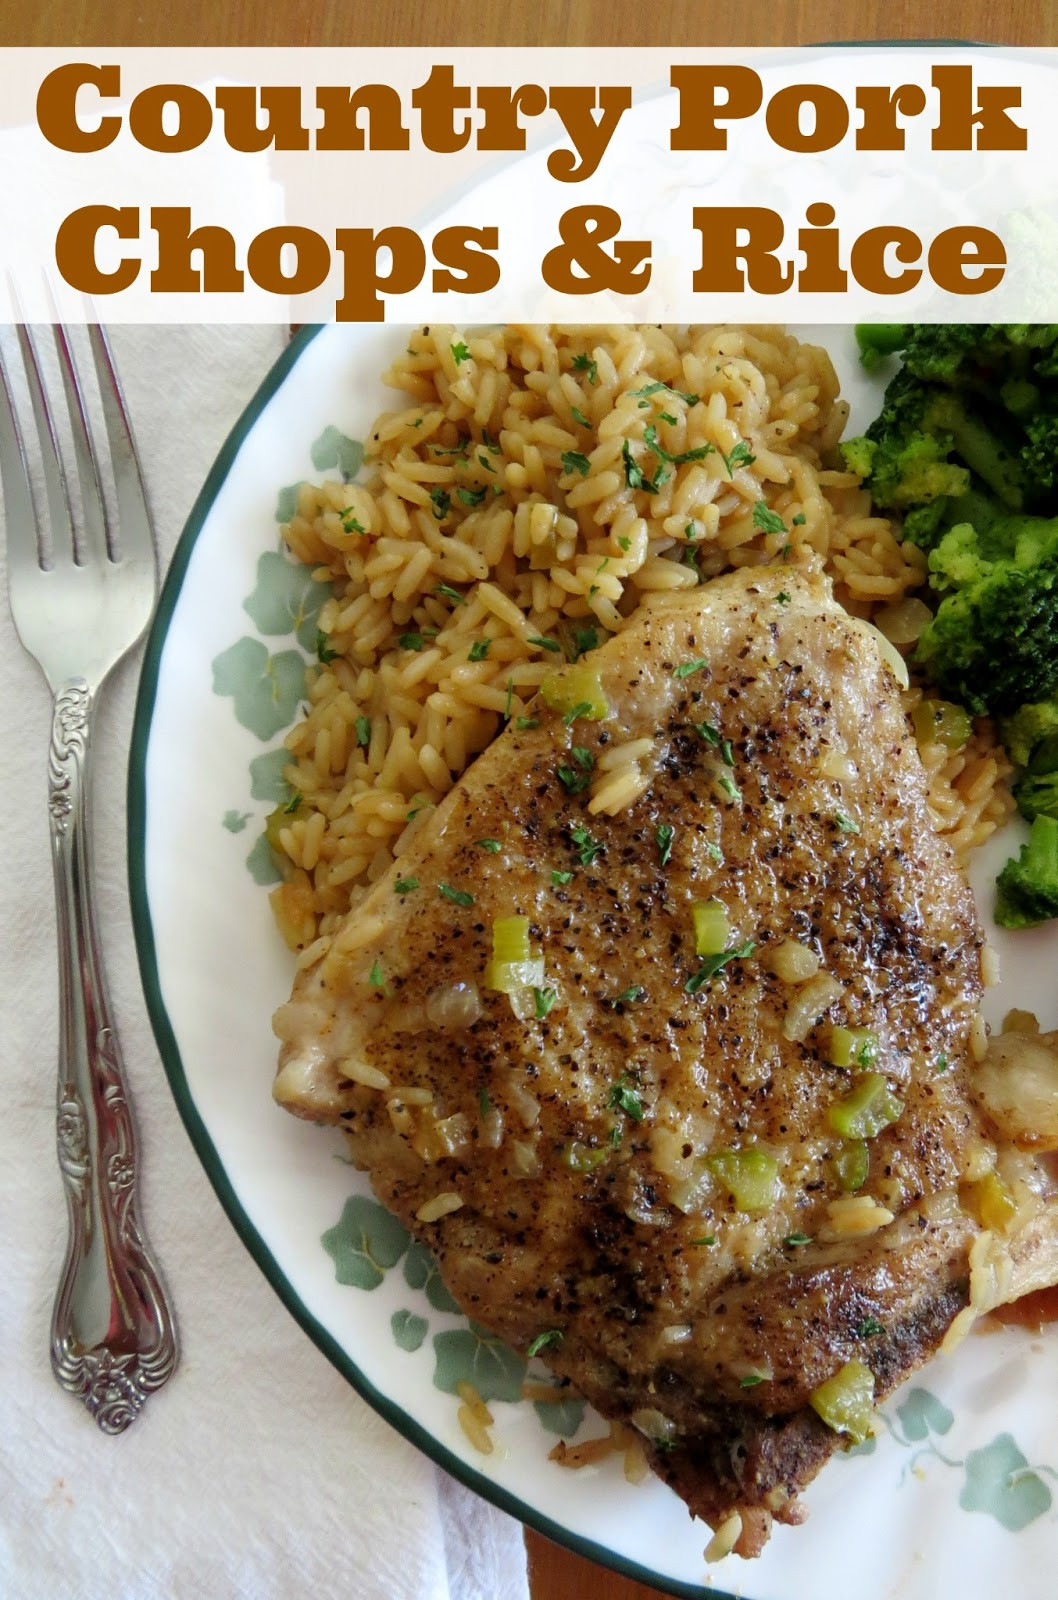 Pork Chops And Rice Recipe
 Country Pork Chops and Rice The Country Cook